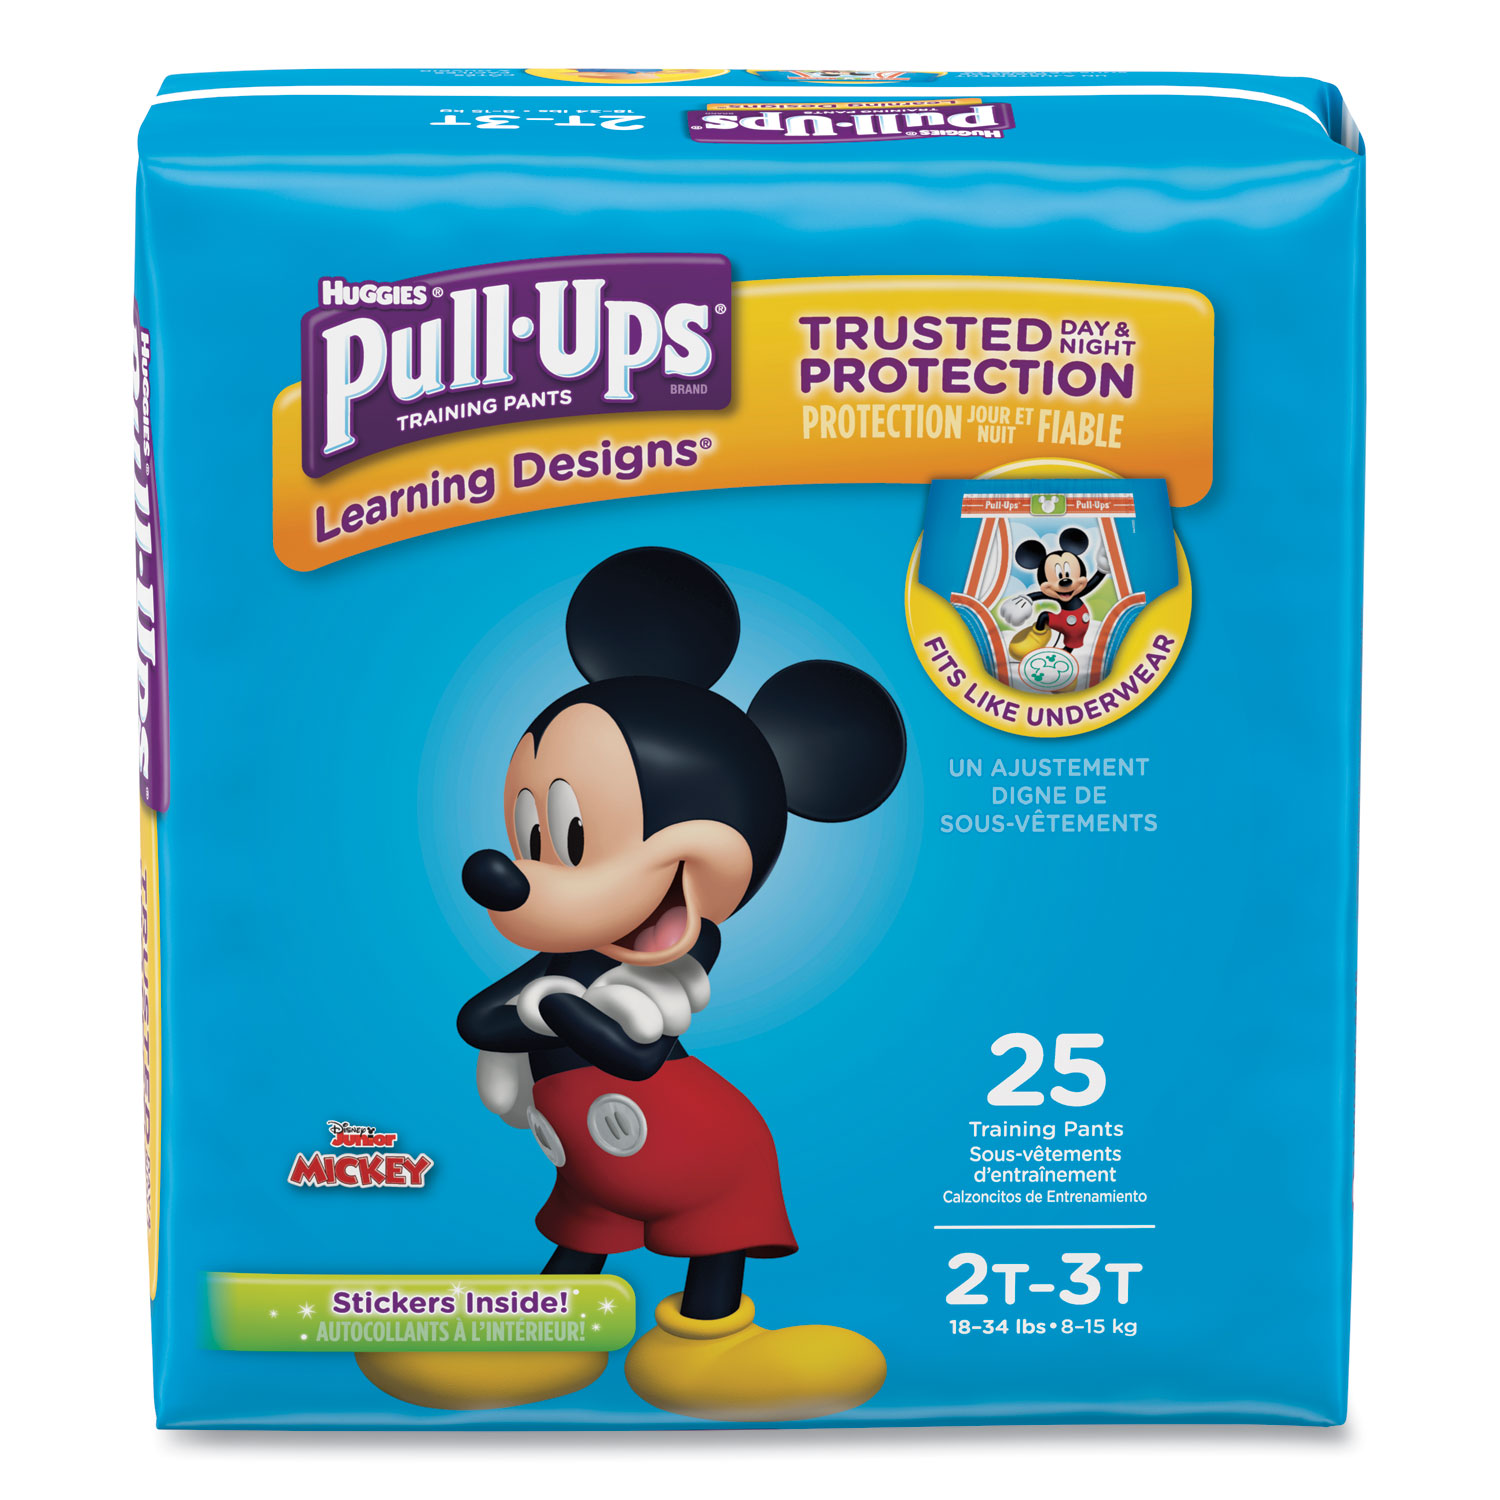  Huggies 45138 Pull-Ups Learning Designs Potty Training Pants for Boys, Size 2T-3T, 25/Pack (KCC45138) 